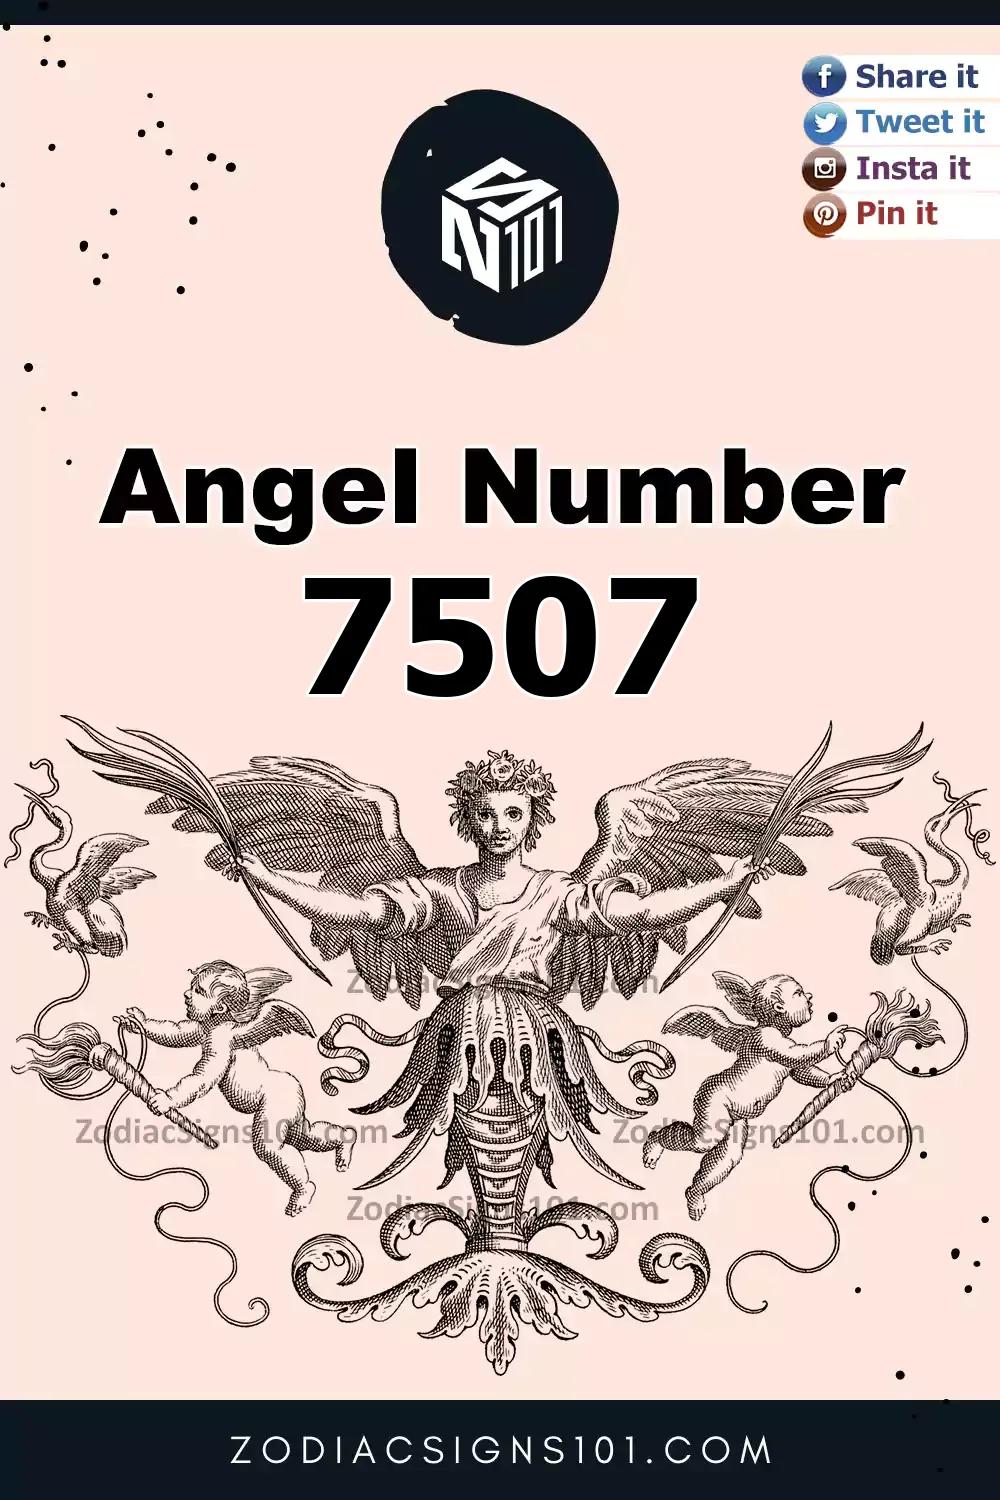 7507 Angel Number Meaning